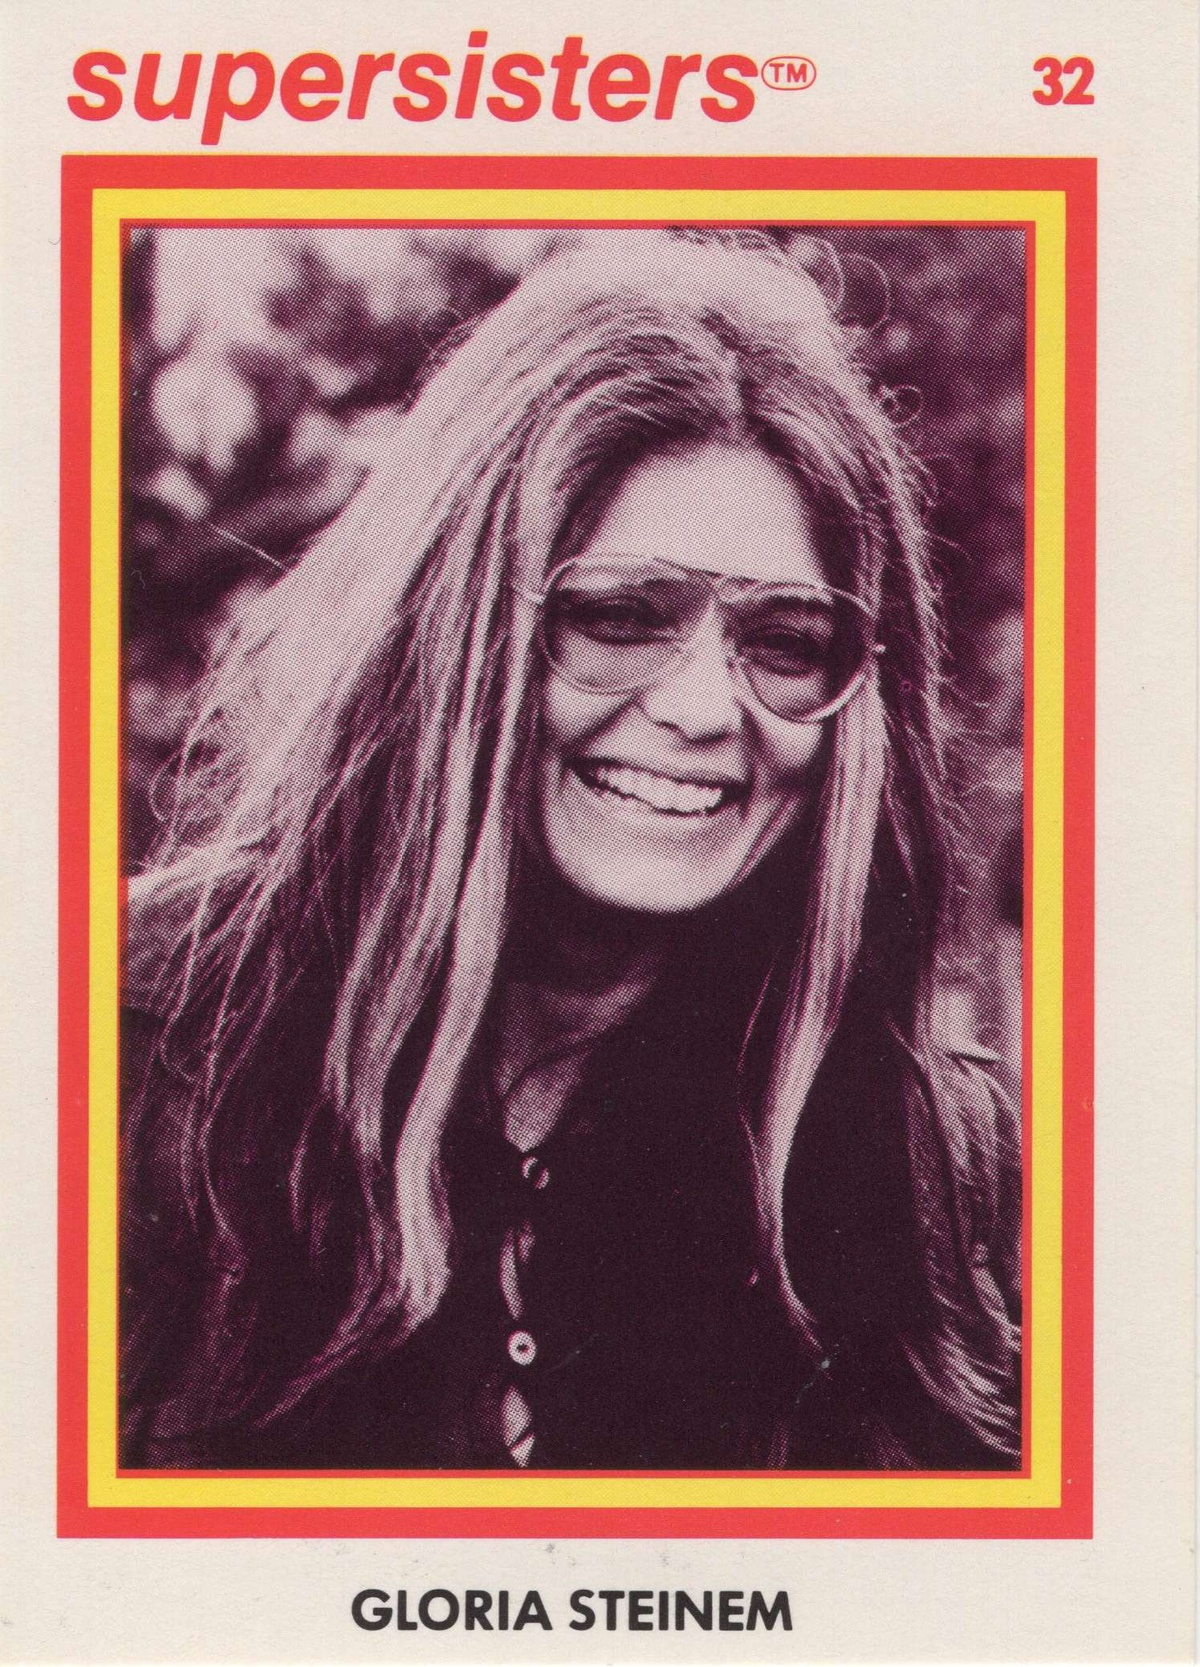 supersisters trading card number 32 with a red and yellow border featuring a black and white photo of feminist icon Gloria Steinem